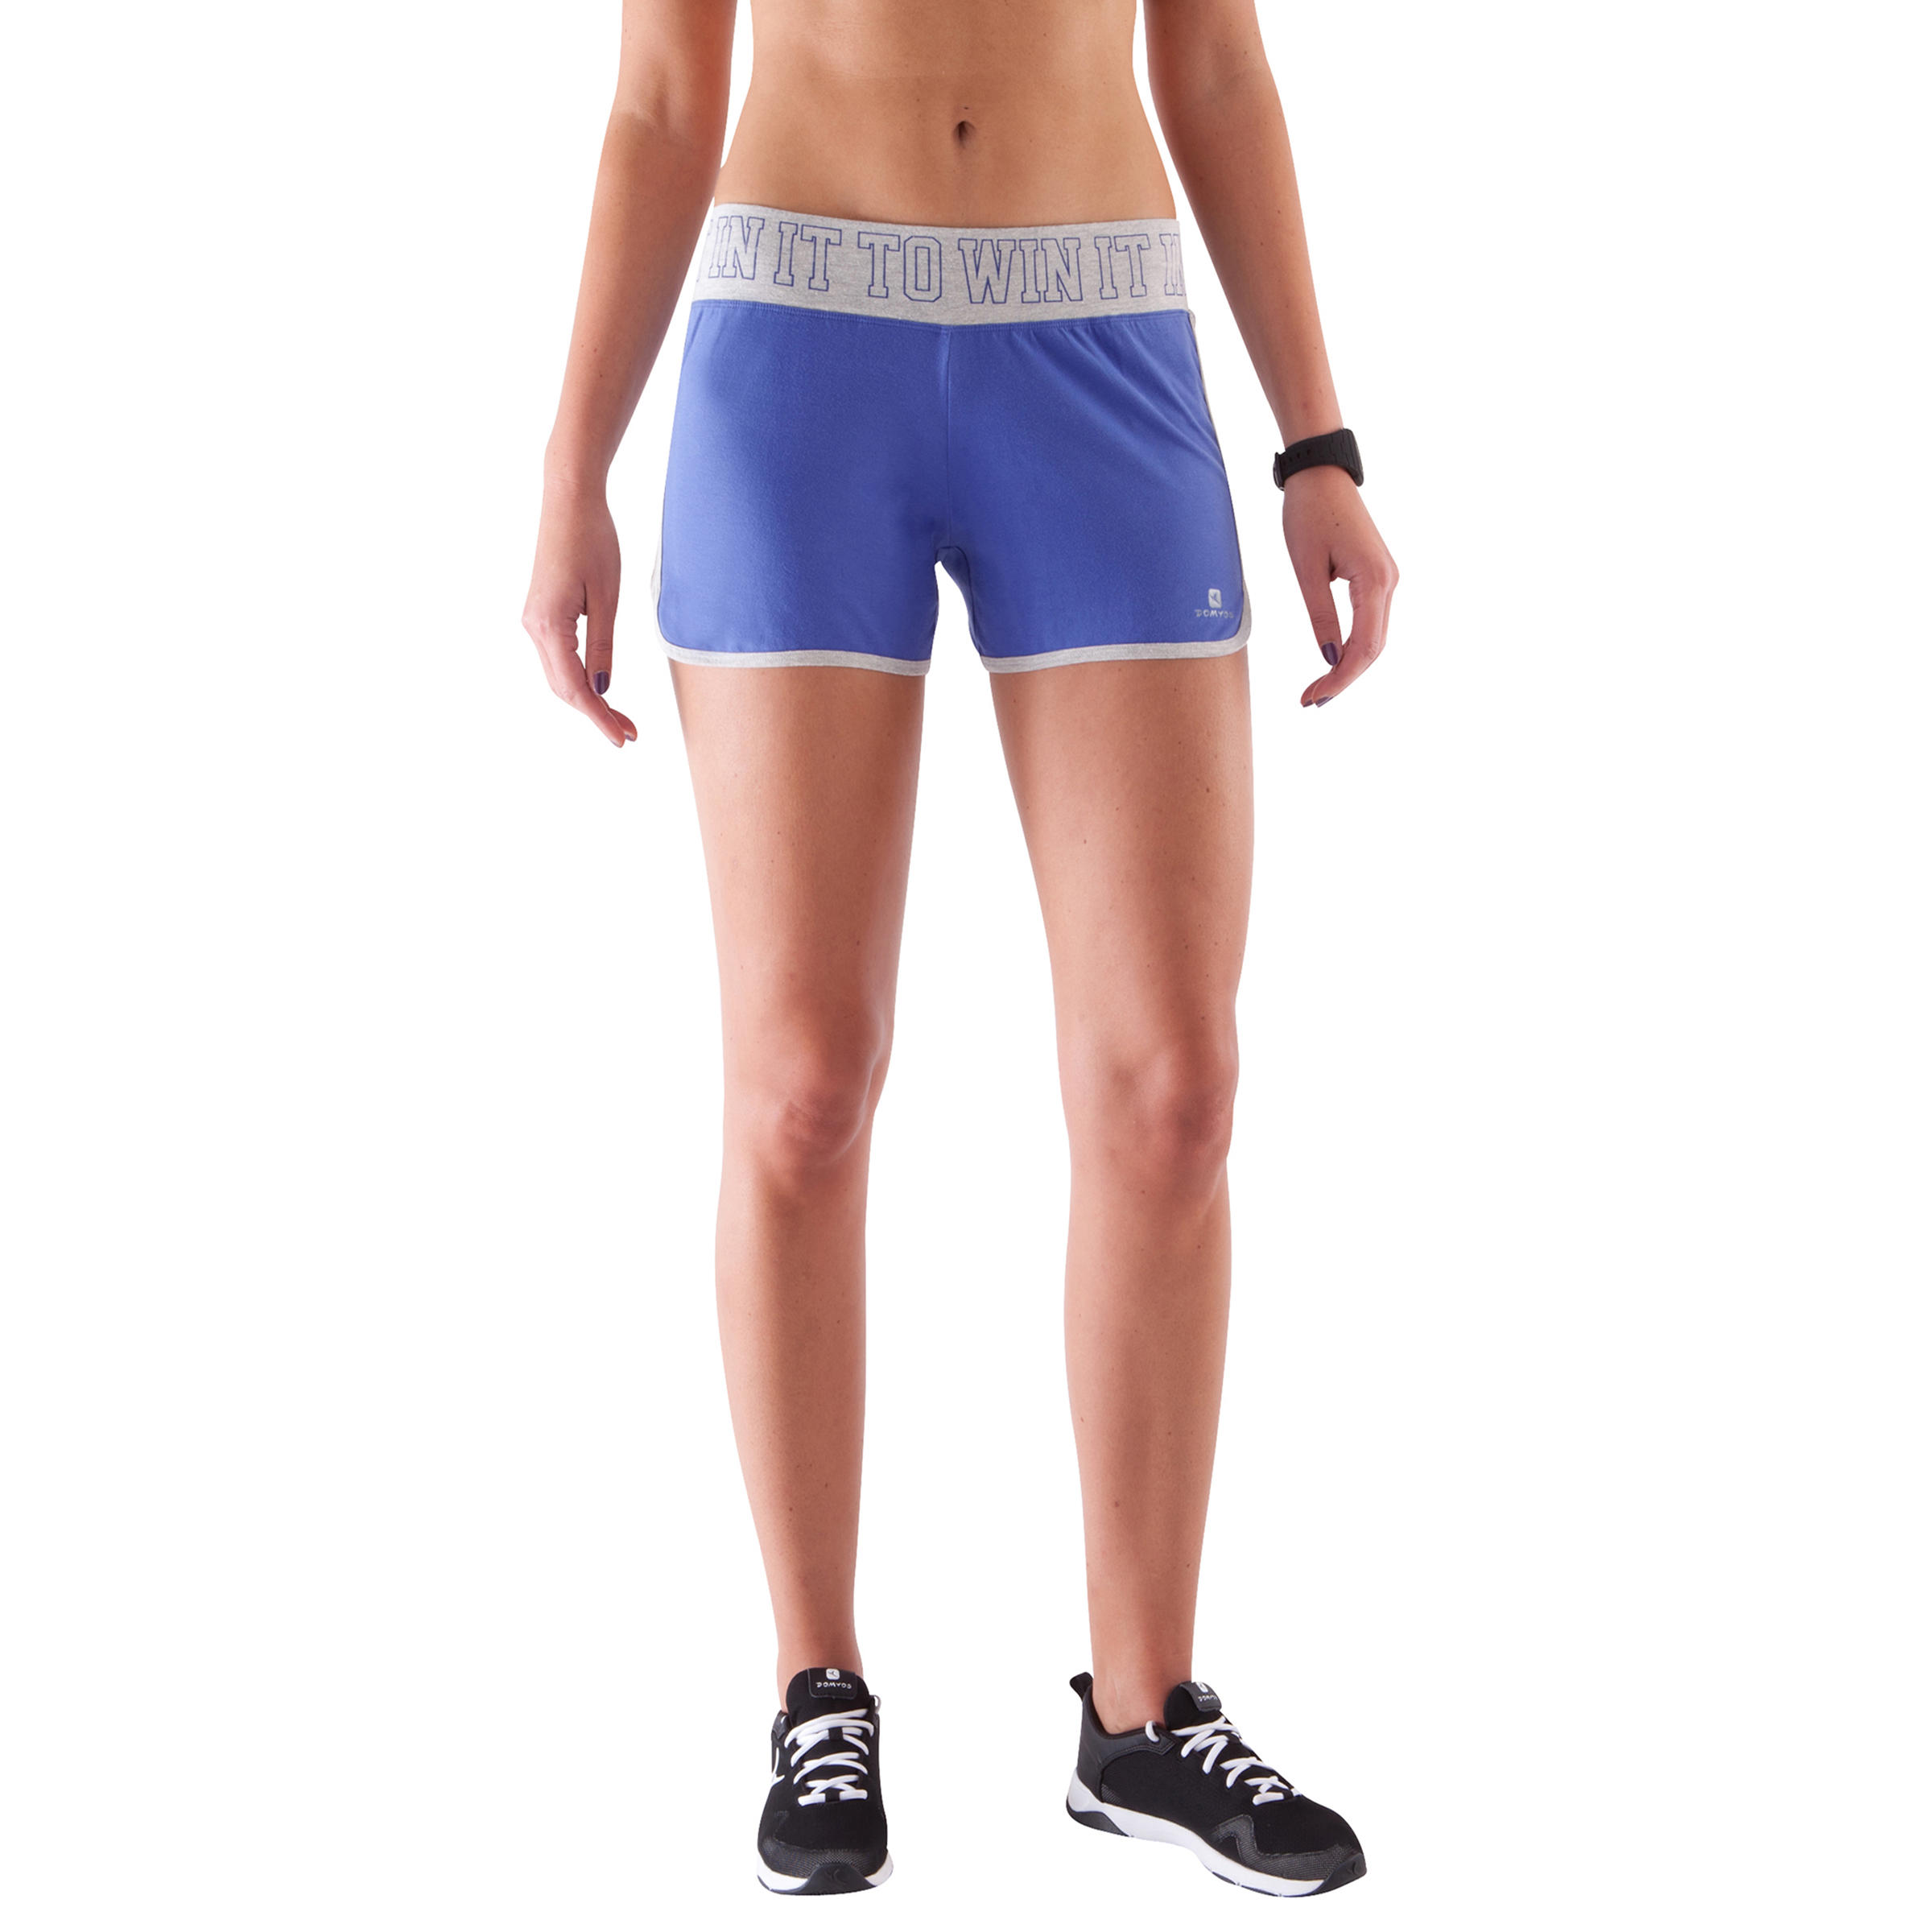 Women's Fitness Shorts with Contrasting Waistband - Blue/Grey 3/10